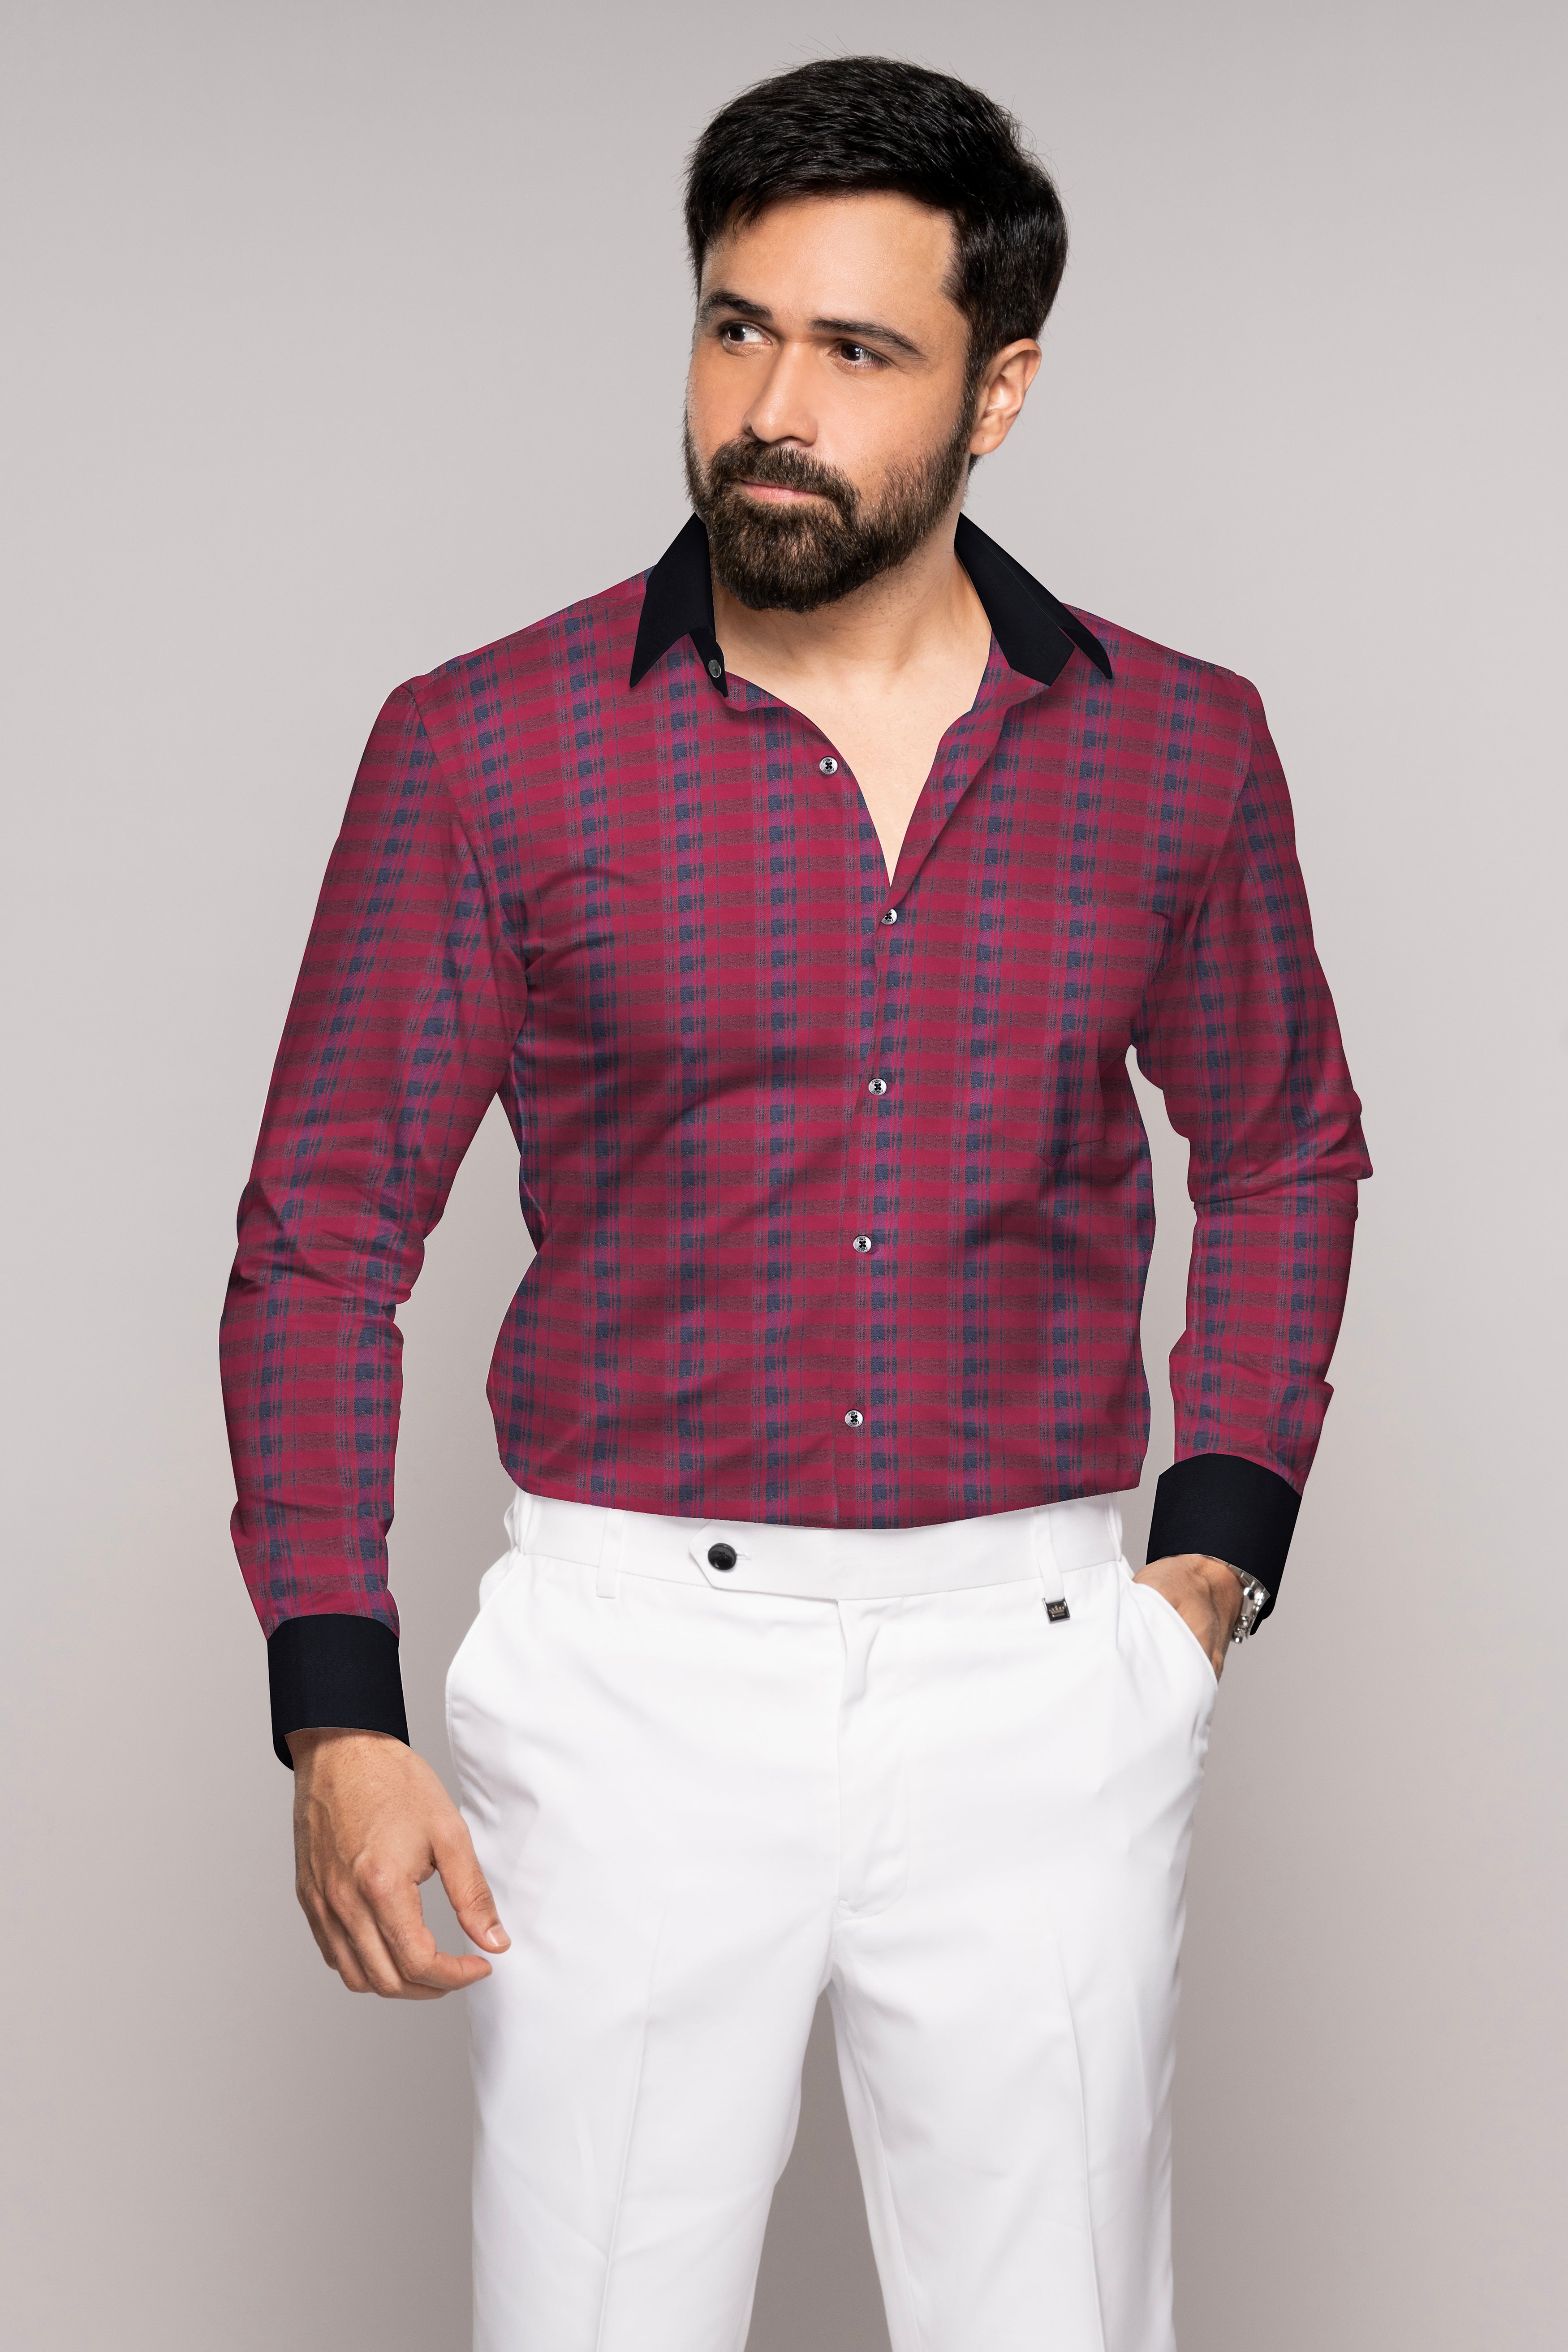 CLARET RED TWILL CHECKERED WITH BLACK CUFFS AND COLLAR PREMIUM COTTON SHIRT